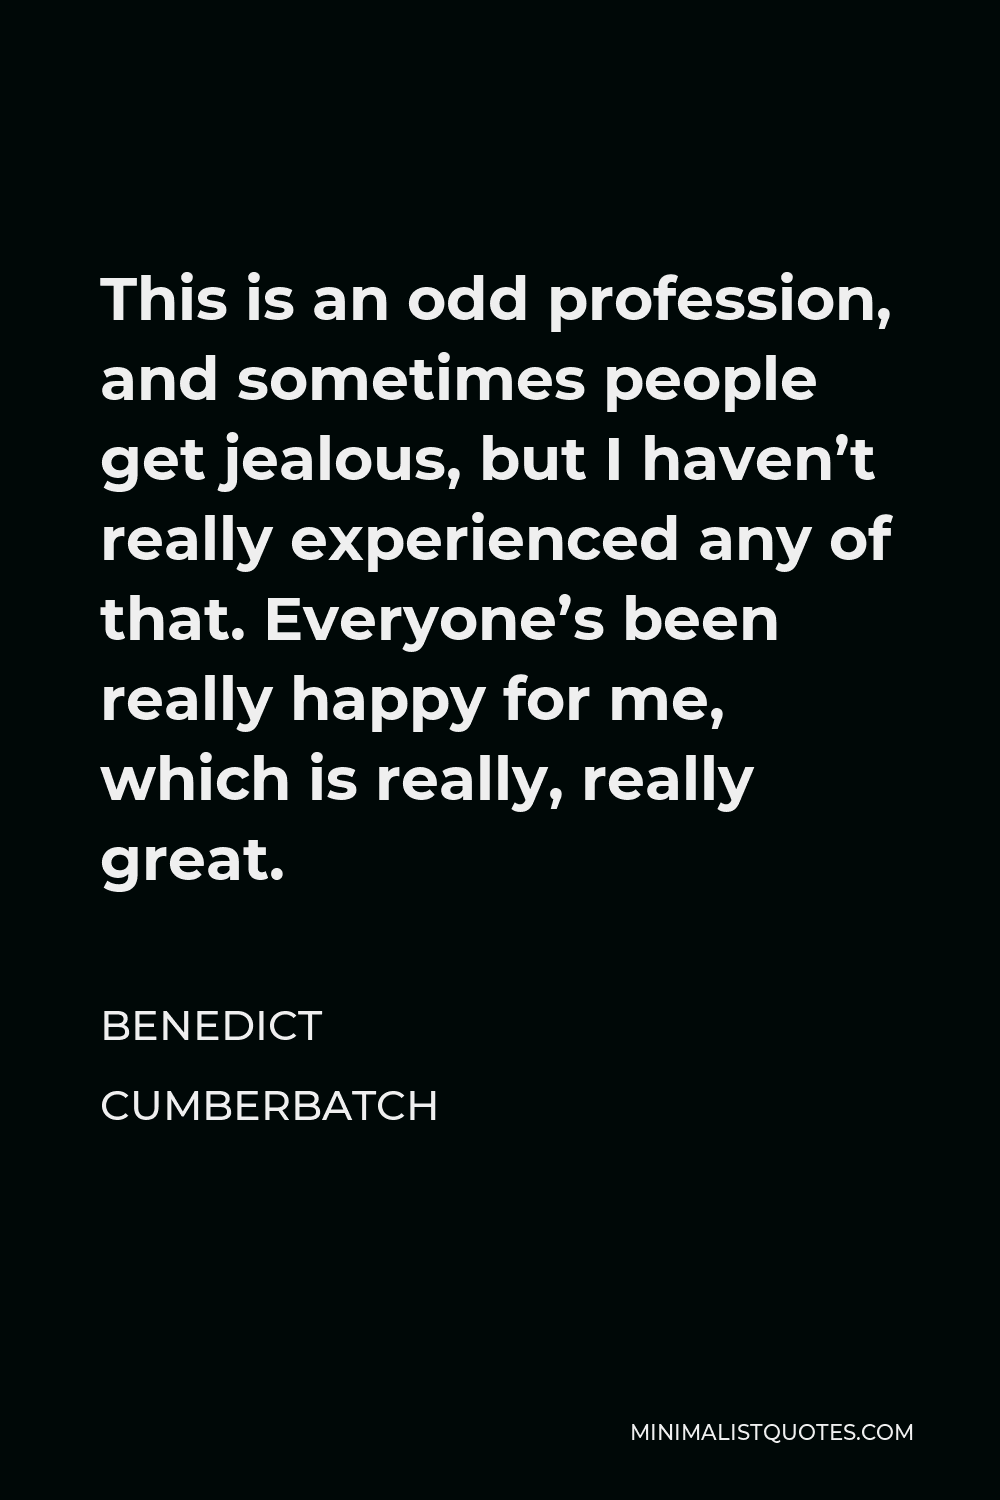 Benedict Cumberbatch Quote - This is an odd profession, and sometimes people get jealous, but I haven’t really experienced any of that. Everyone’s been really happy for me, which is really, really great.